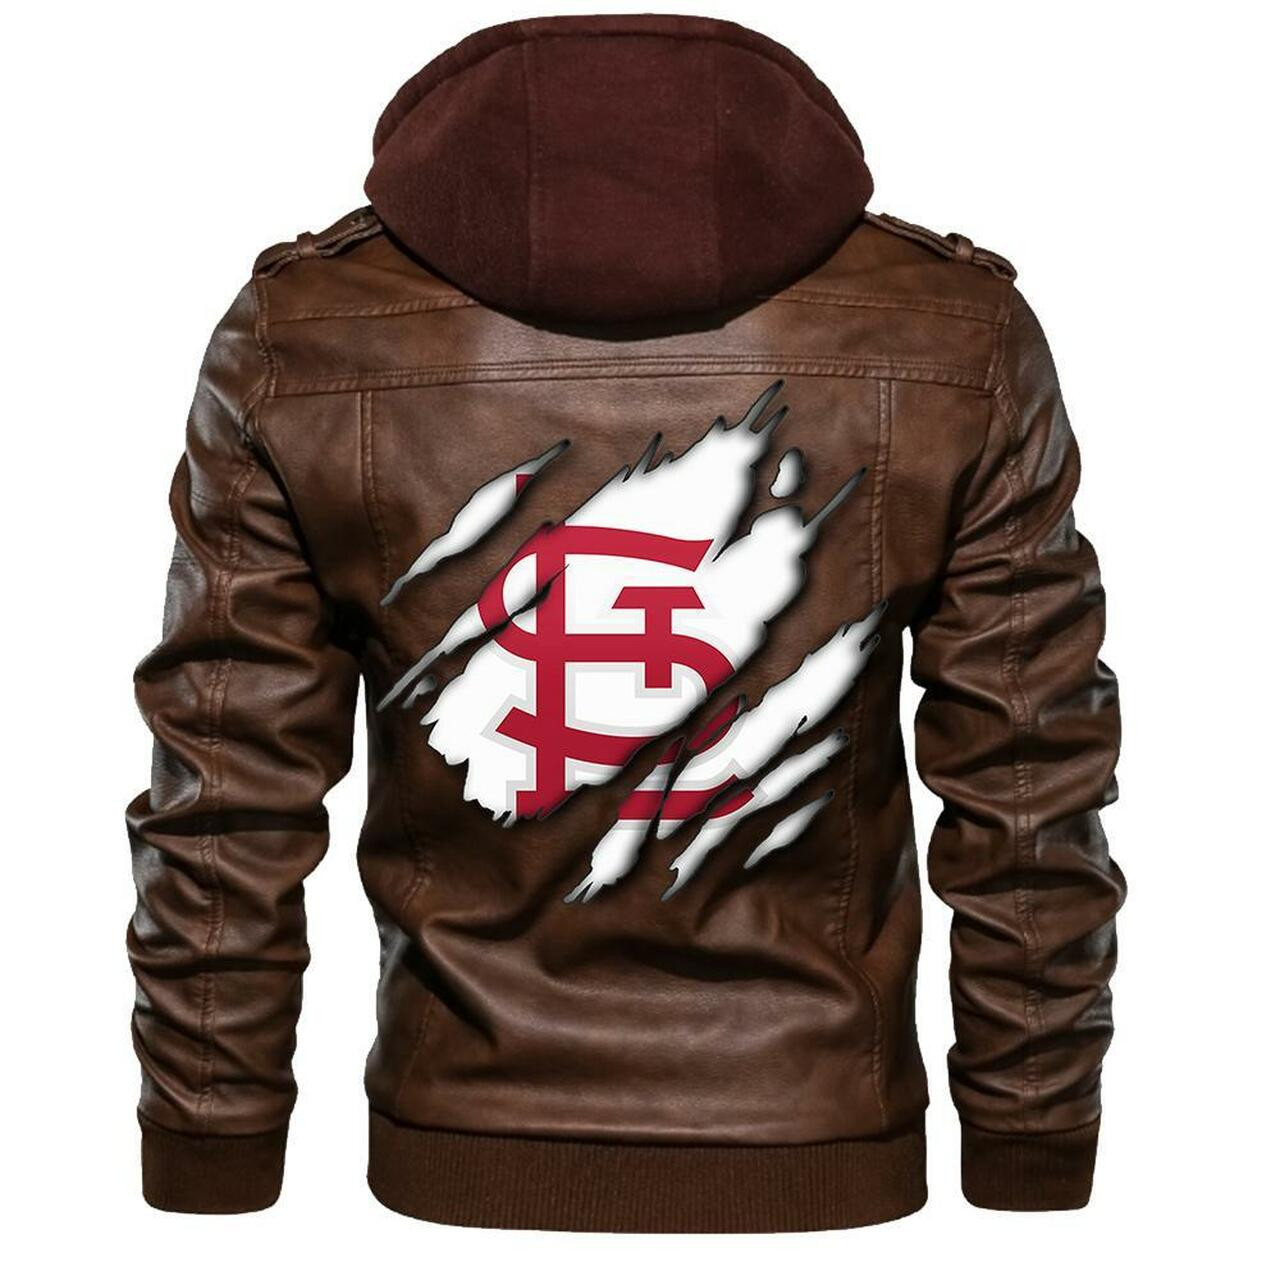 Check out and find the right leather jacket below 423